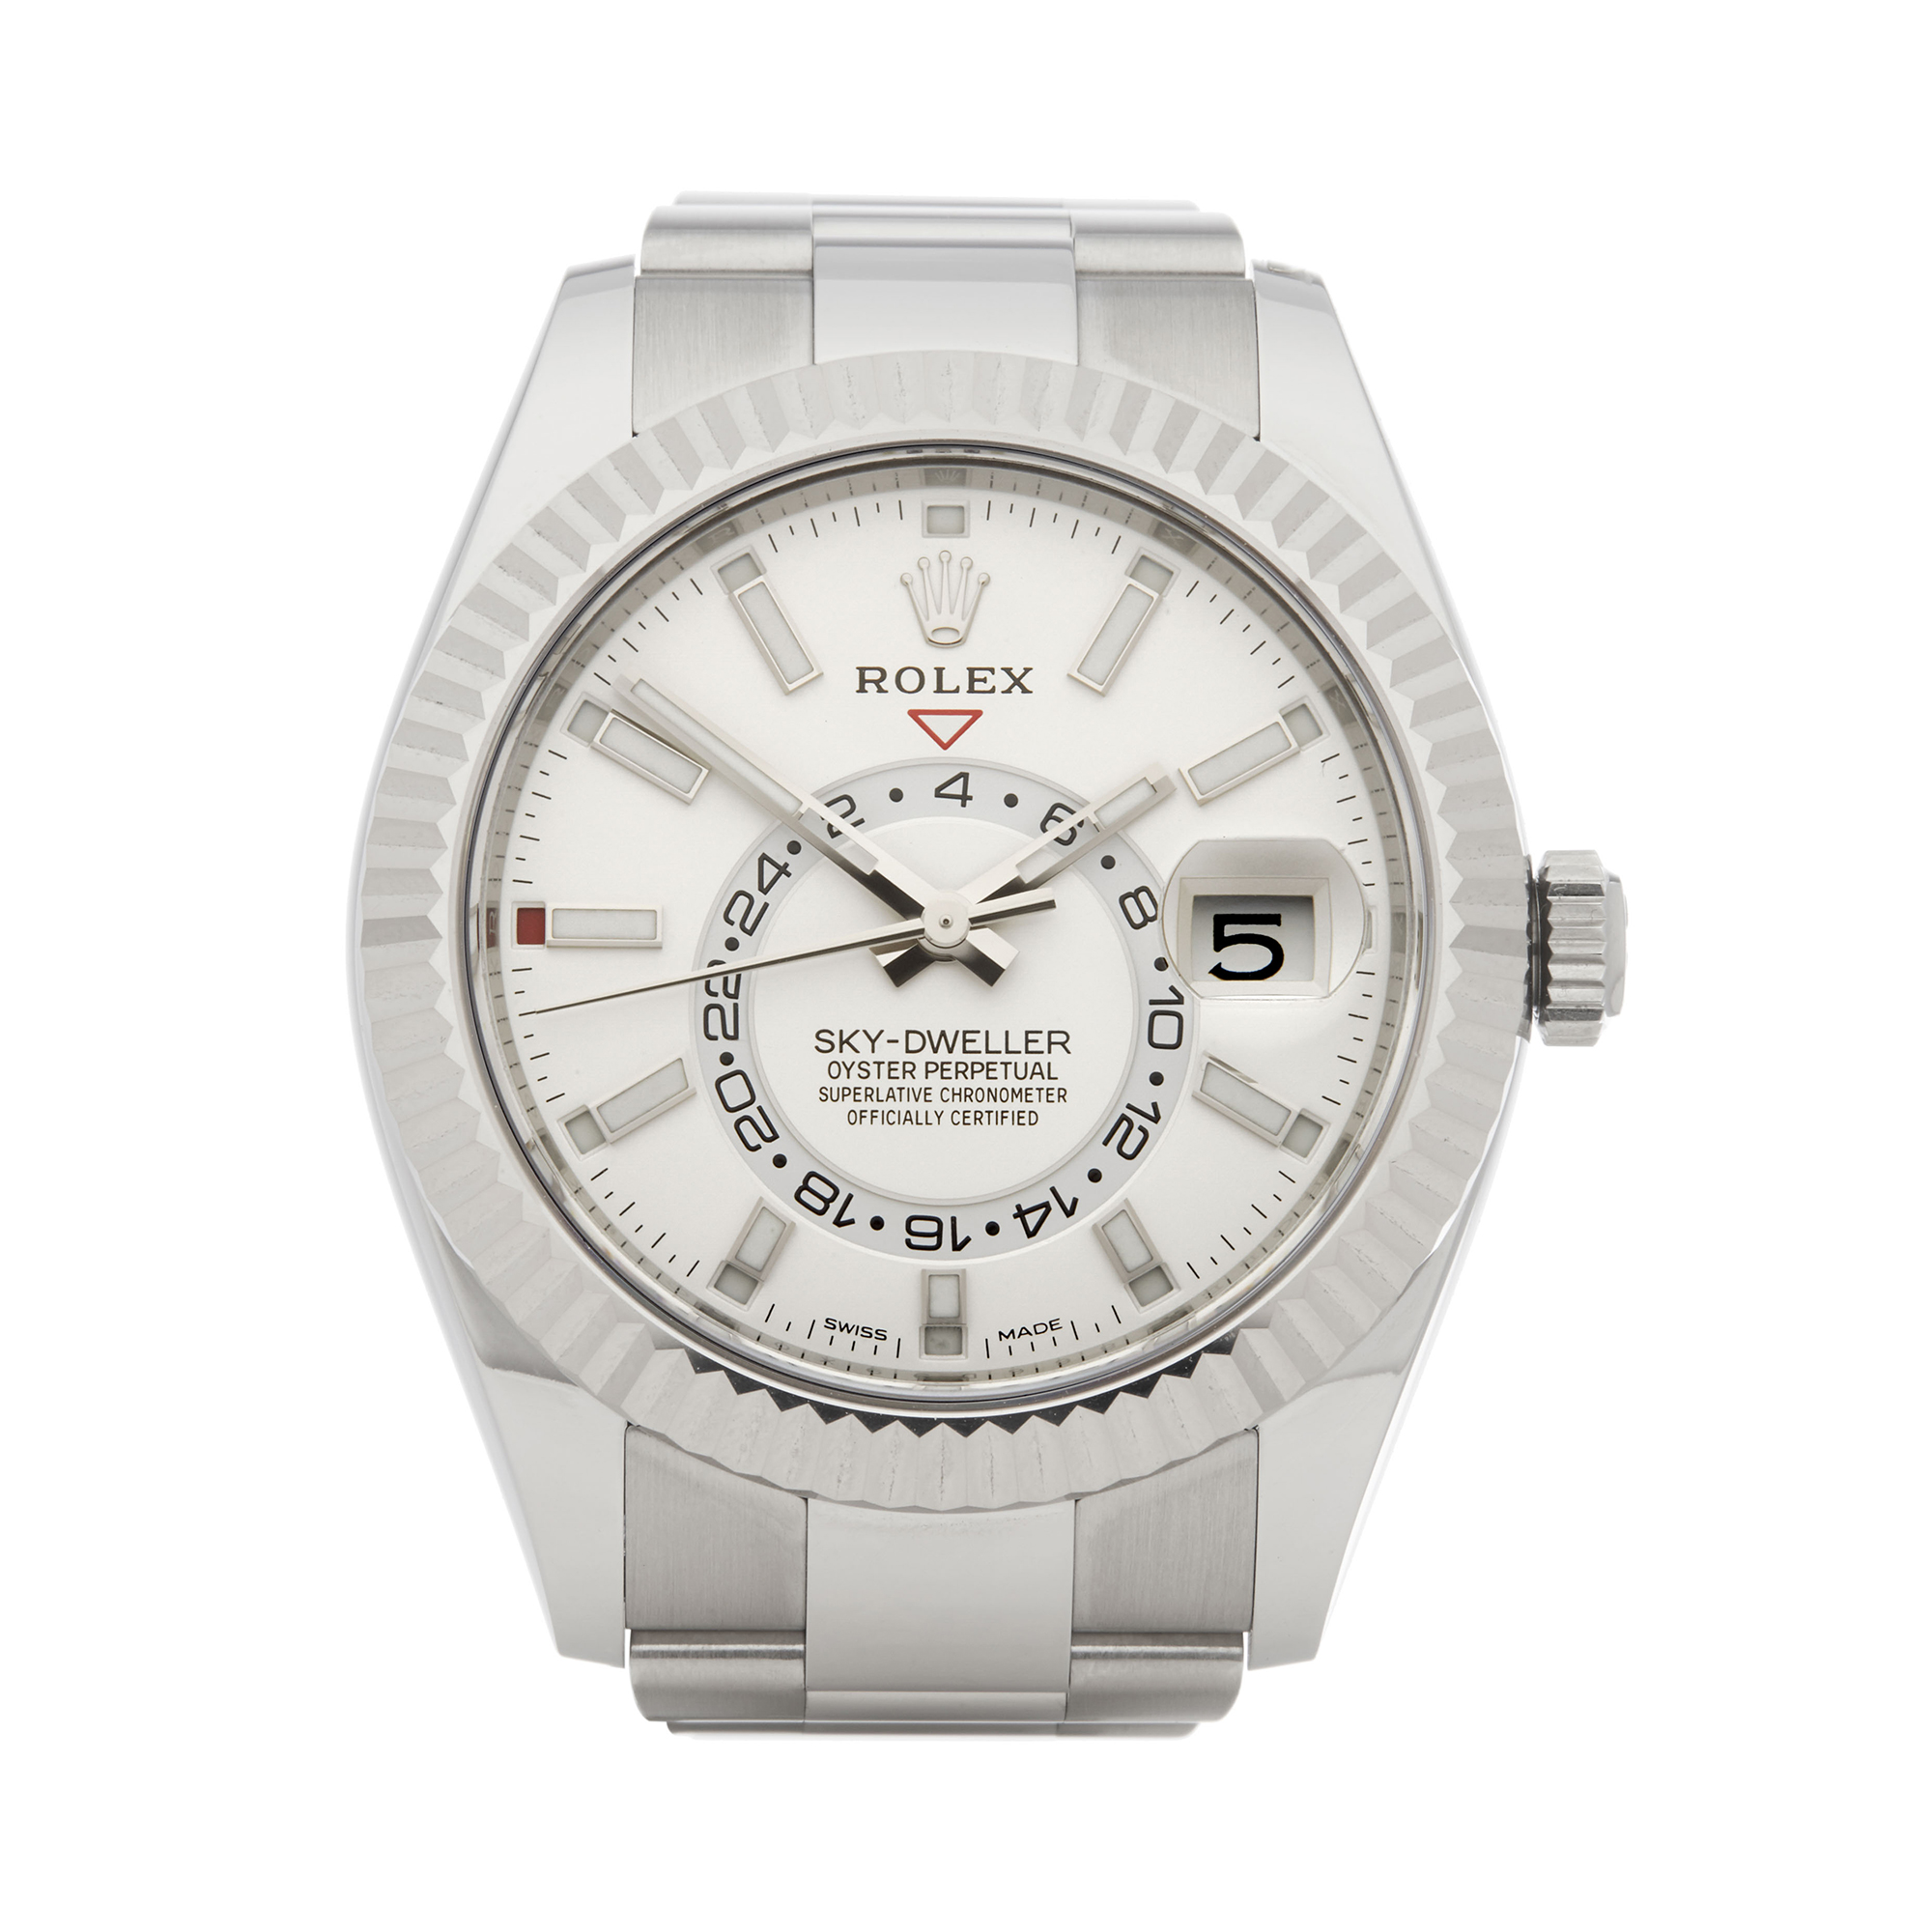 2018 Rolex Sky-Dweller Stainless Steel - 326934 - Image 9 of 9